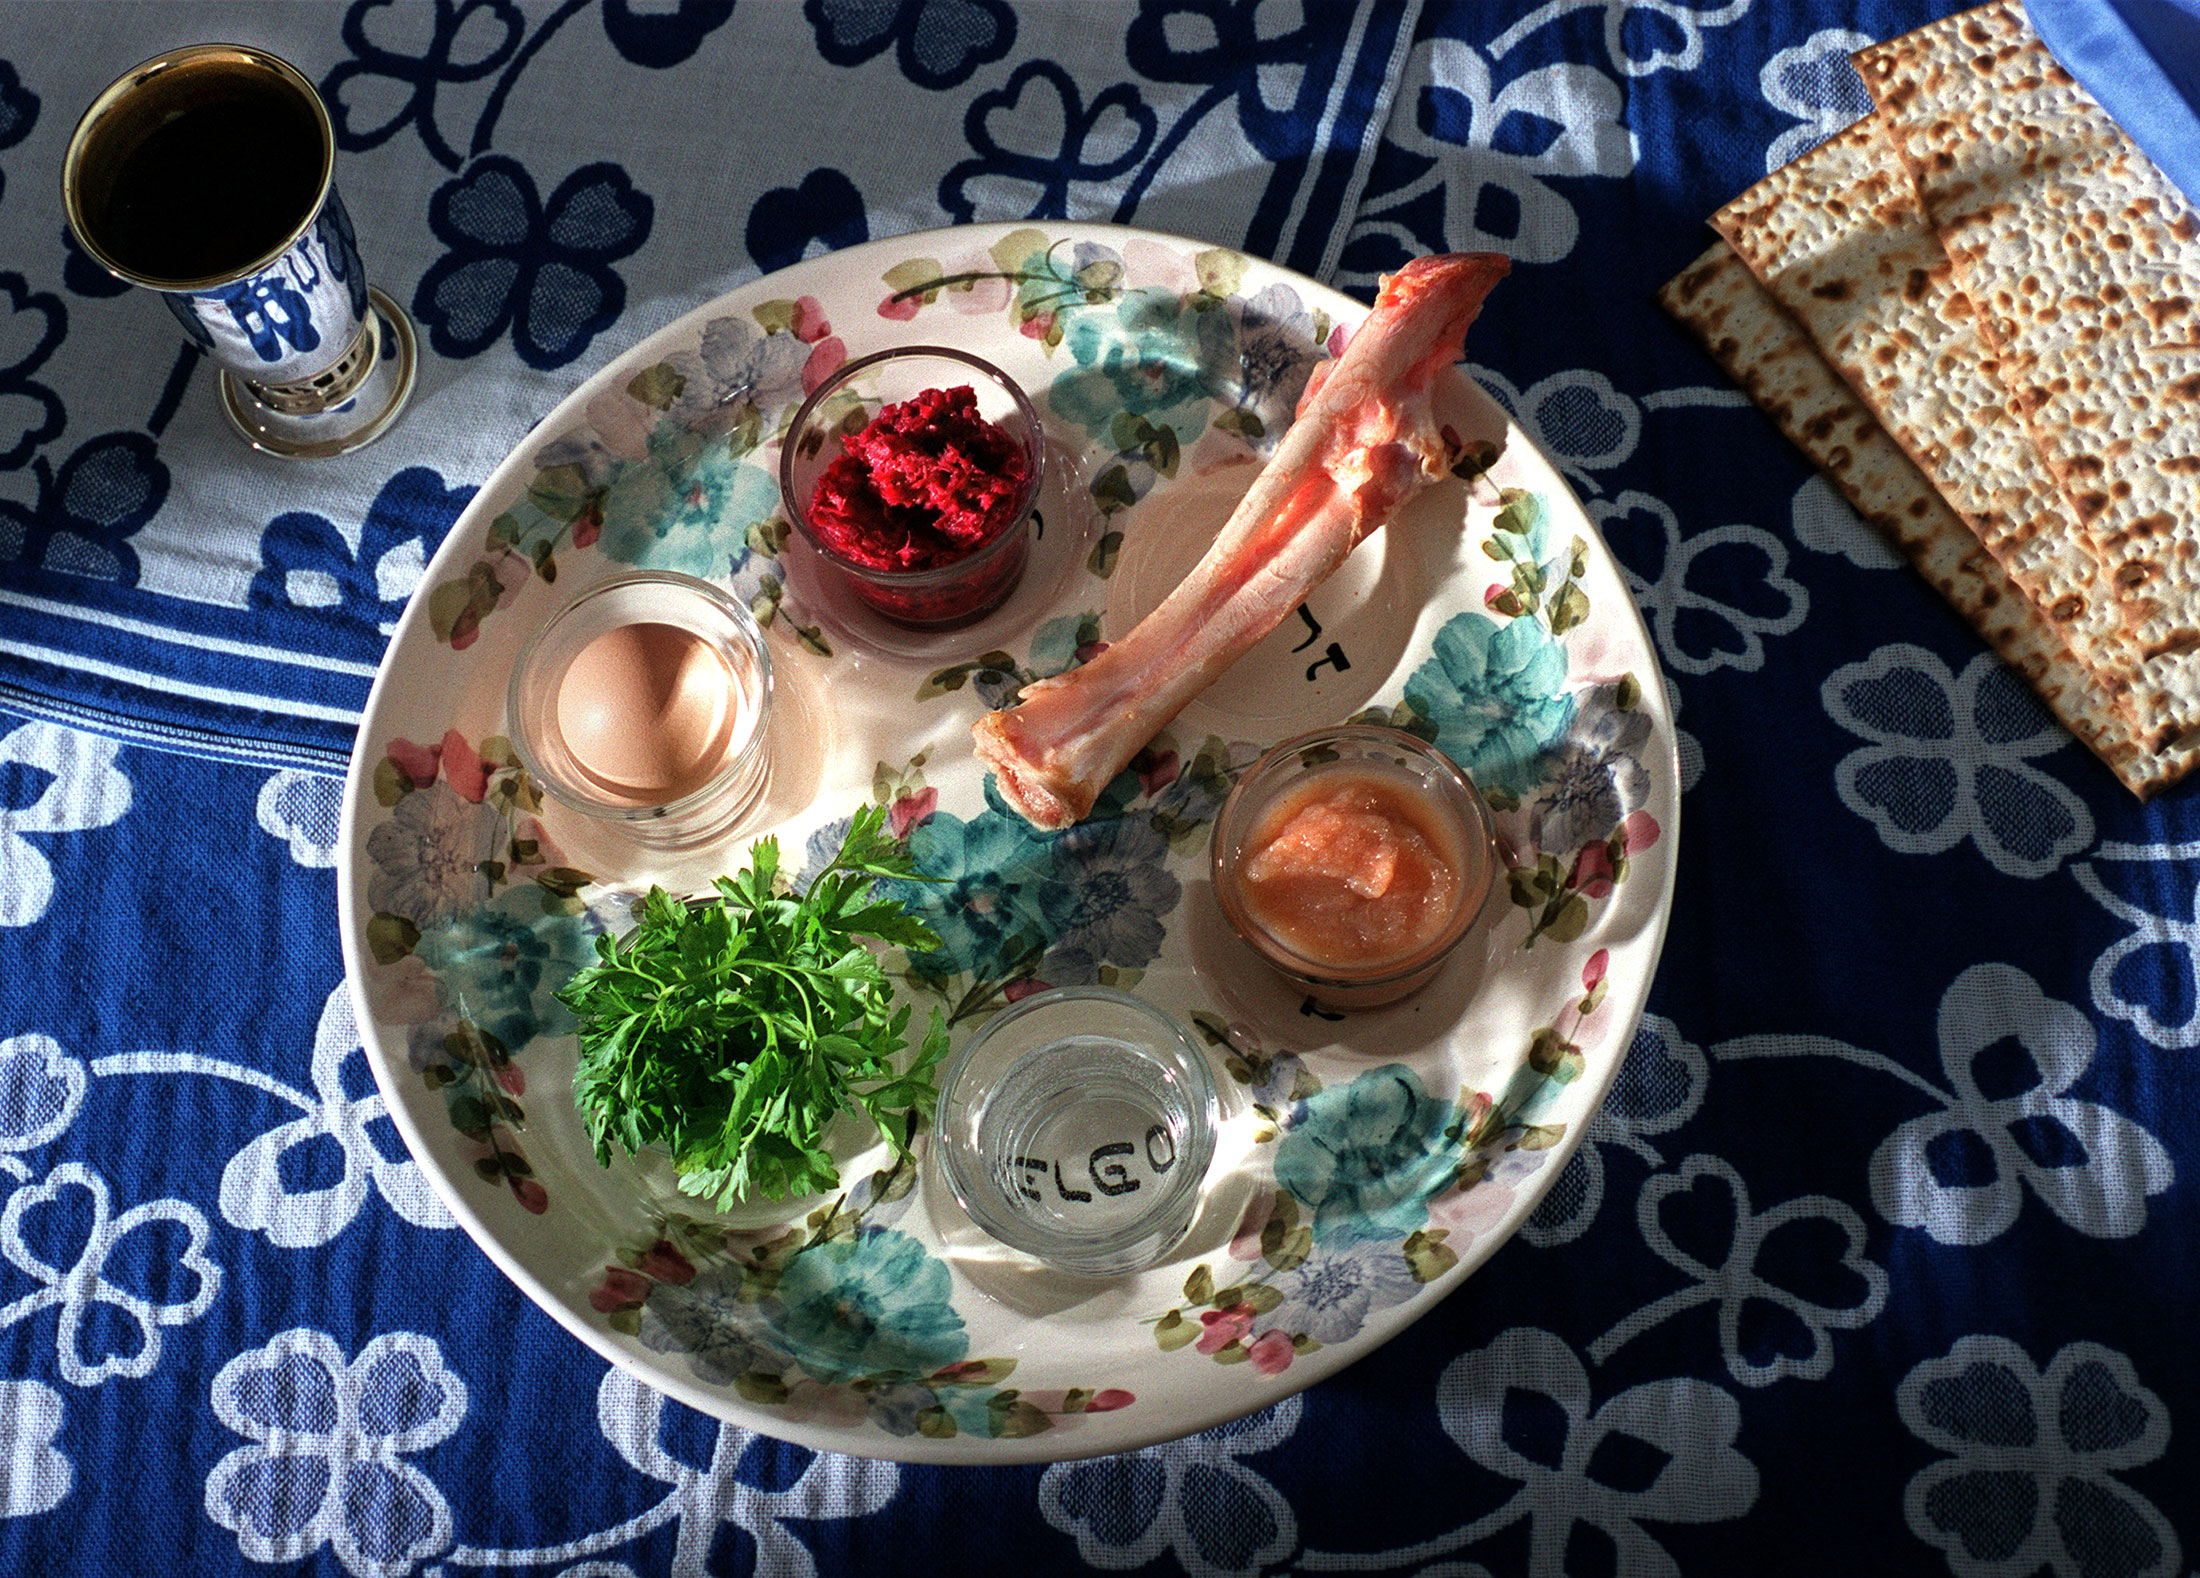 A traditional Passover seder plate.
